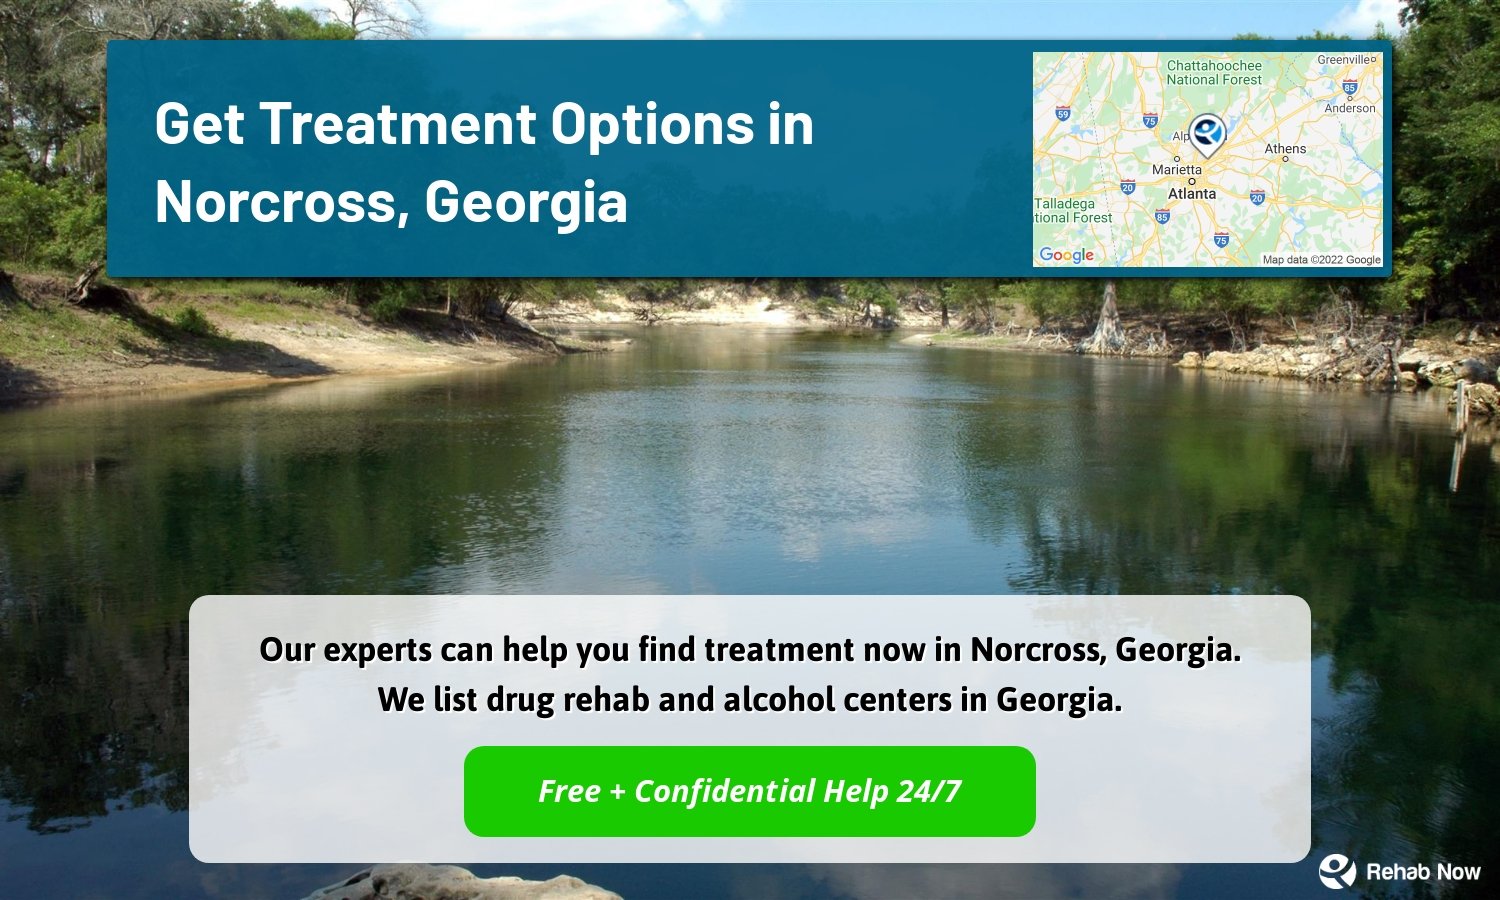 Our experts can help you find treatment now in Norcross, Georgia. We list drug rehab and alcohol centers in Georgia.